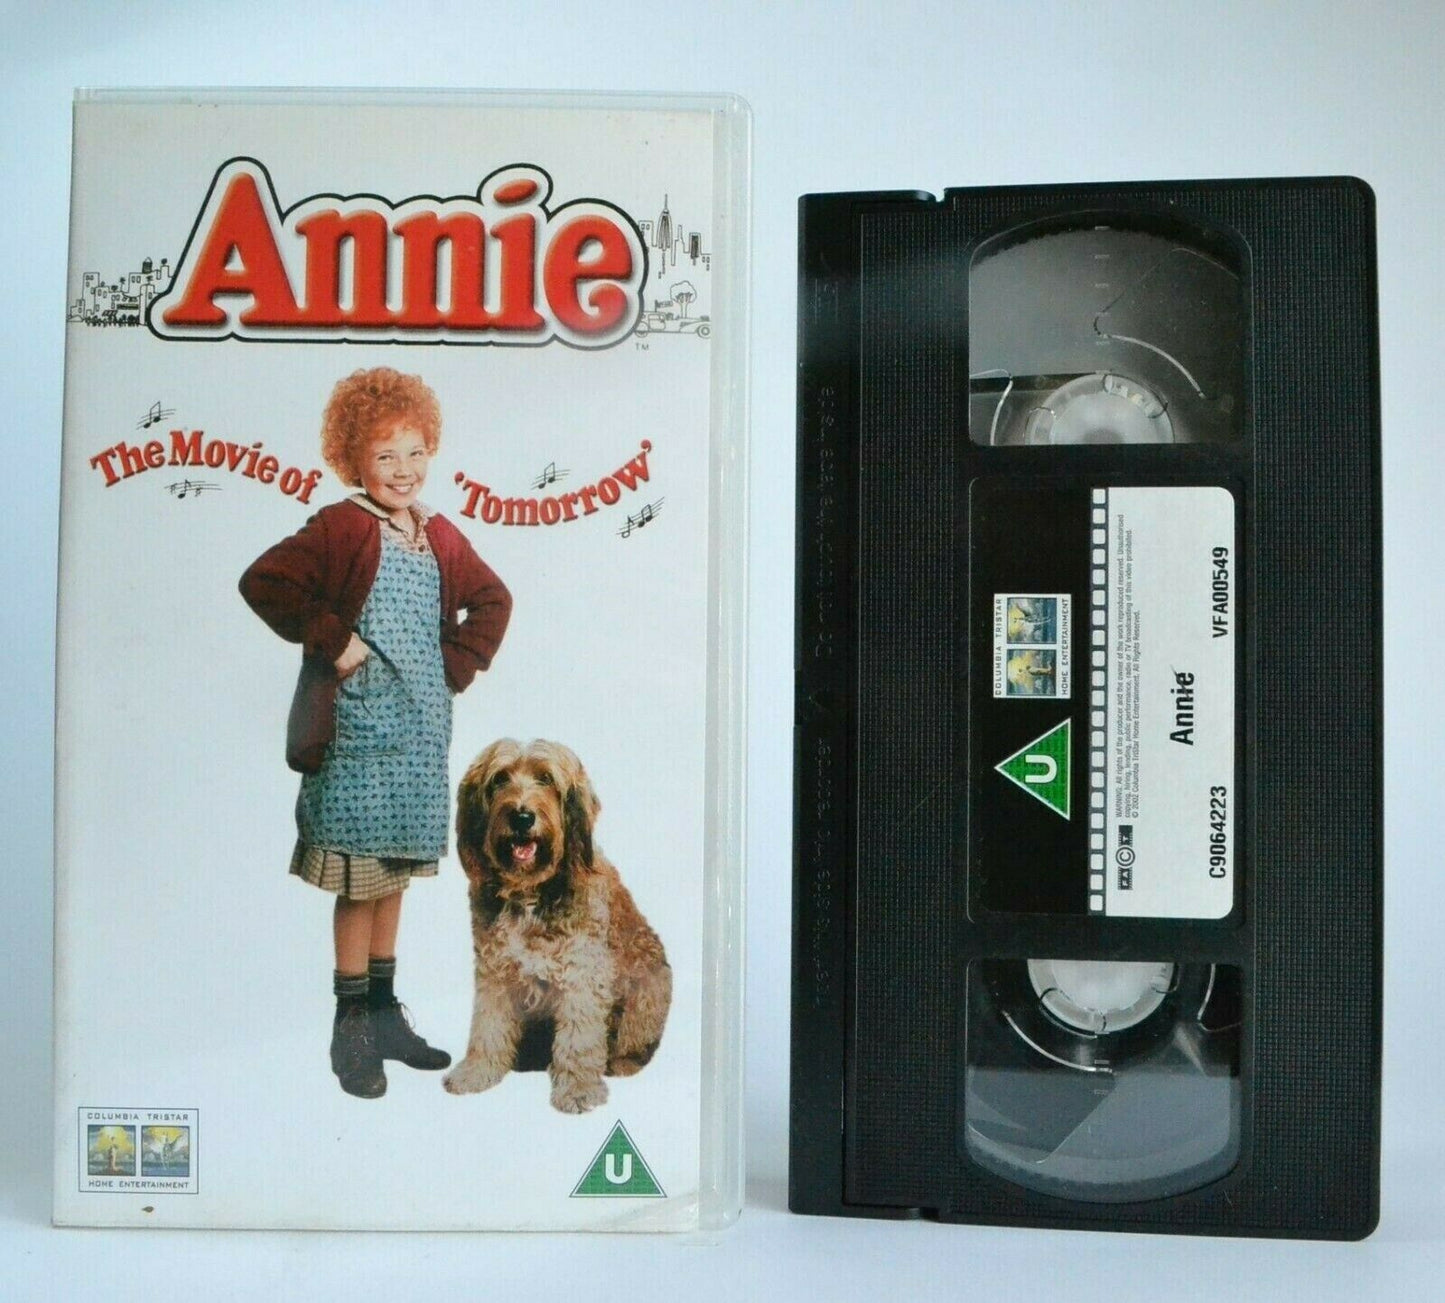 Annie (1982): Based On Broadway Play - Musical Comedy Drama - Children's - VHS-